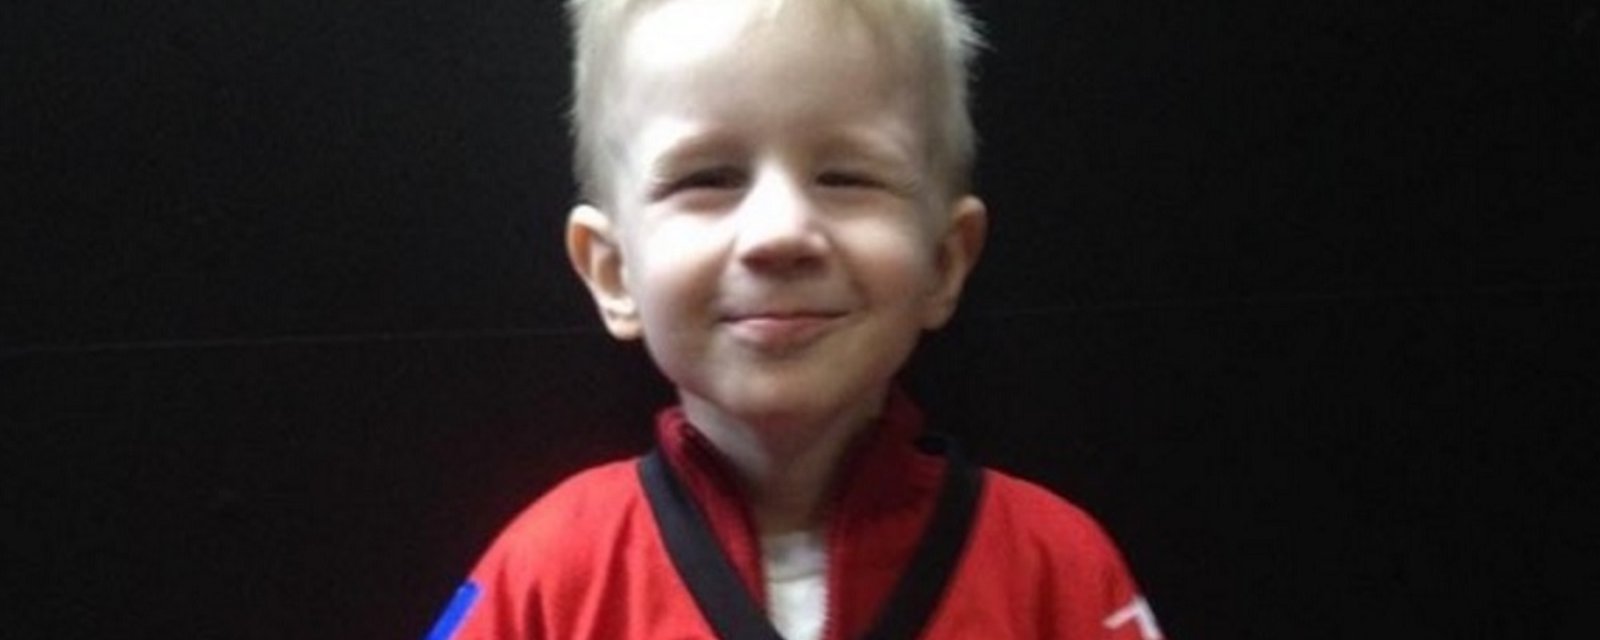 Four-year-old NHL fan with terminal cancer not expected to last the week, but you can help.